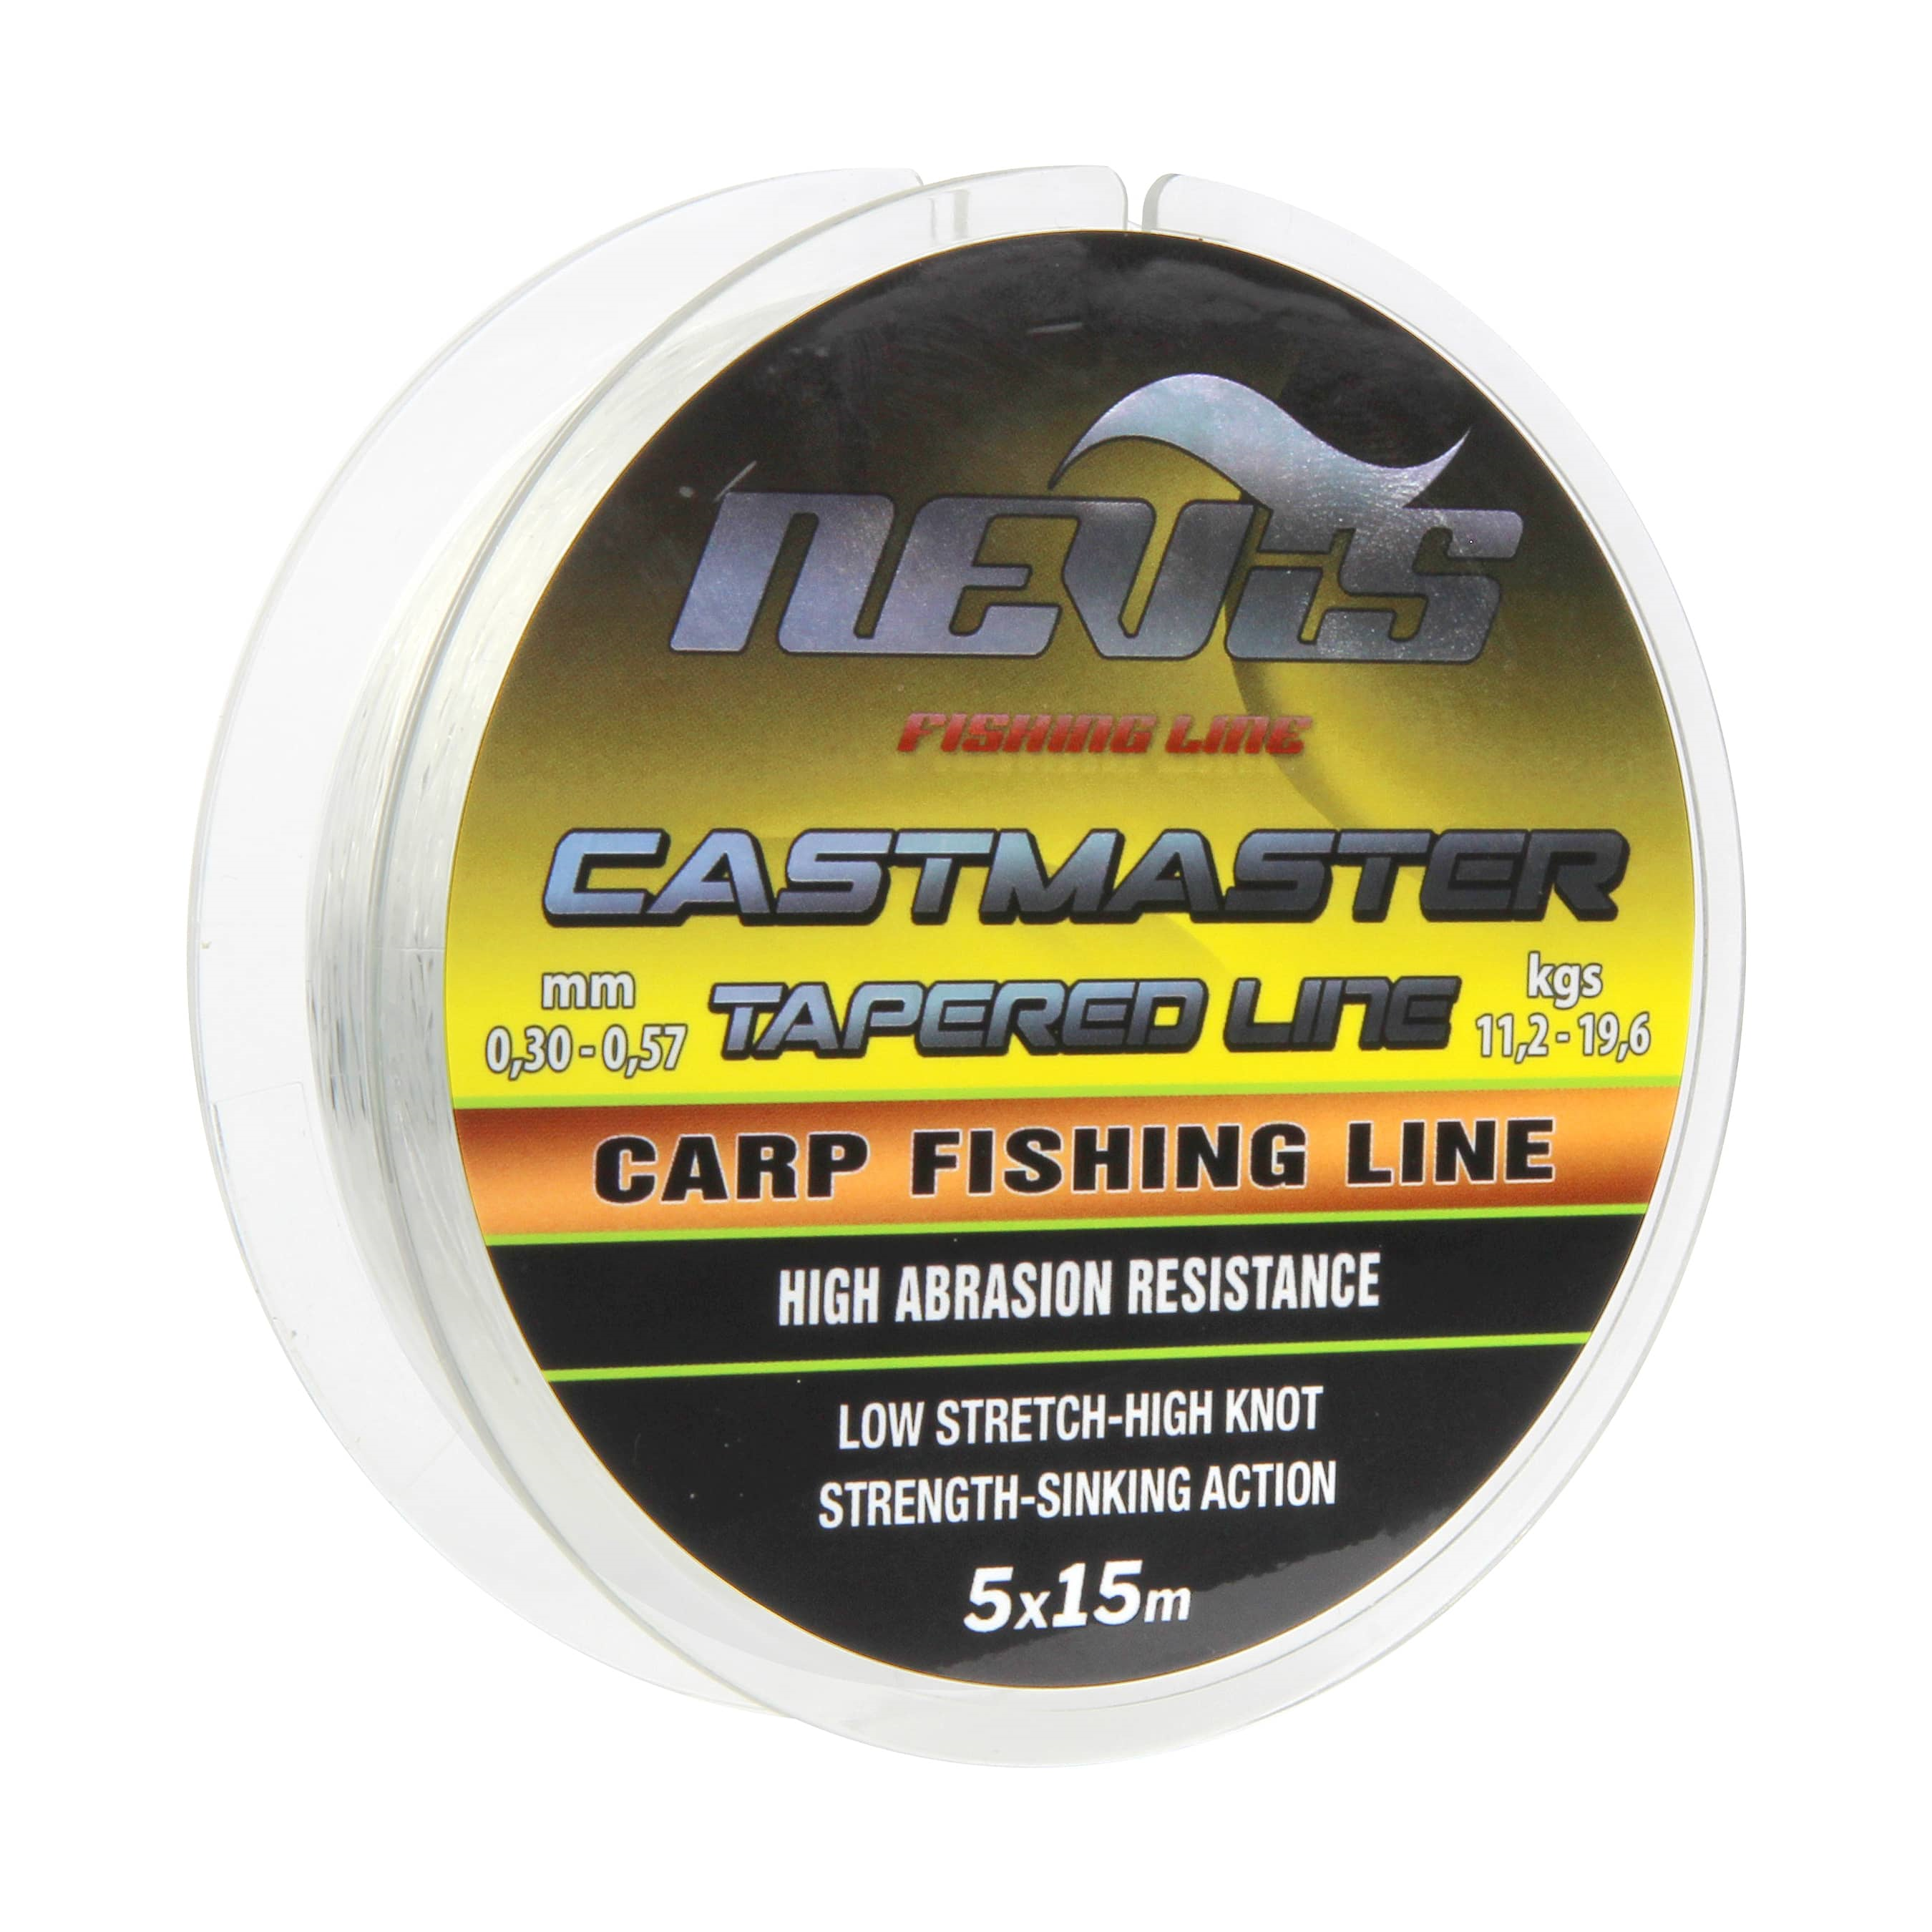 NEVIS CASTMASTER TAPERED LINE 5x15M 0,20-0,57MM